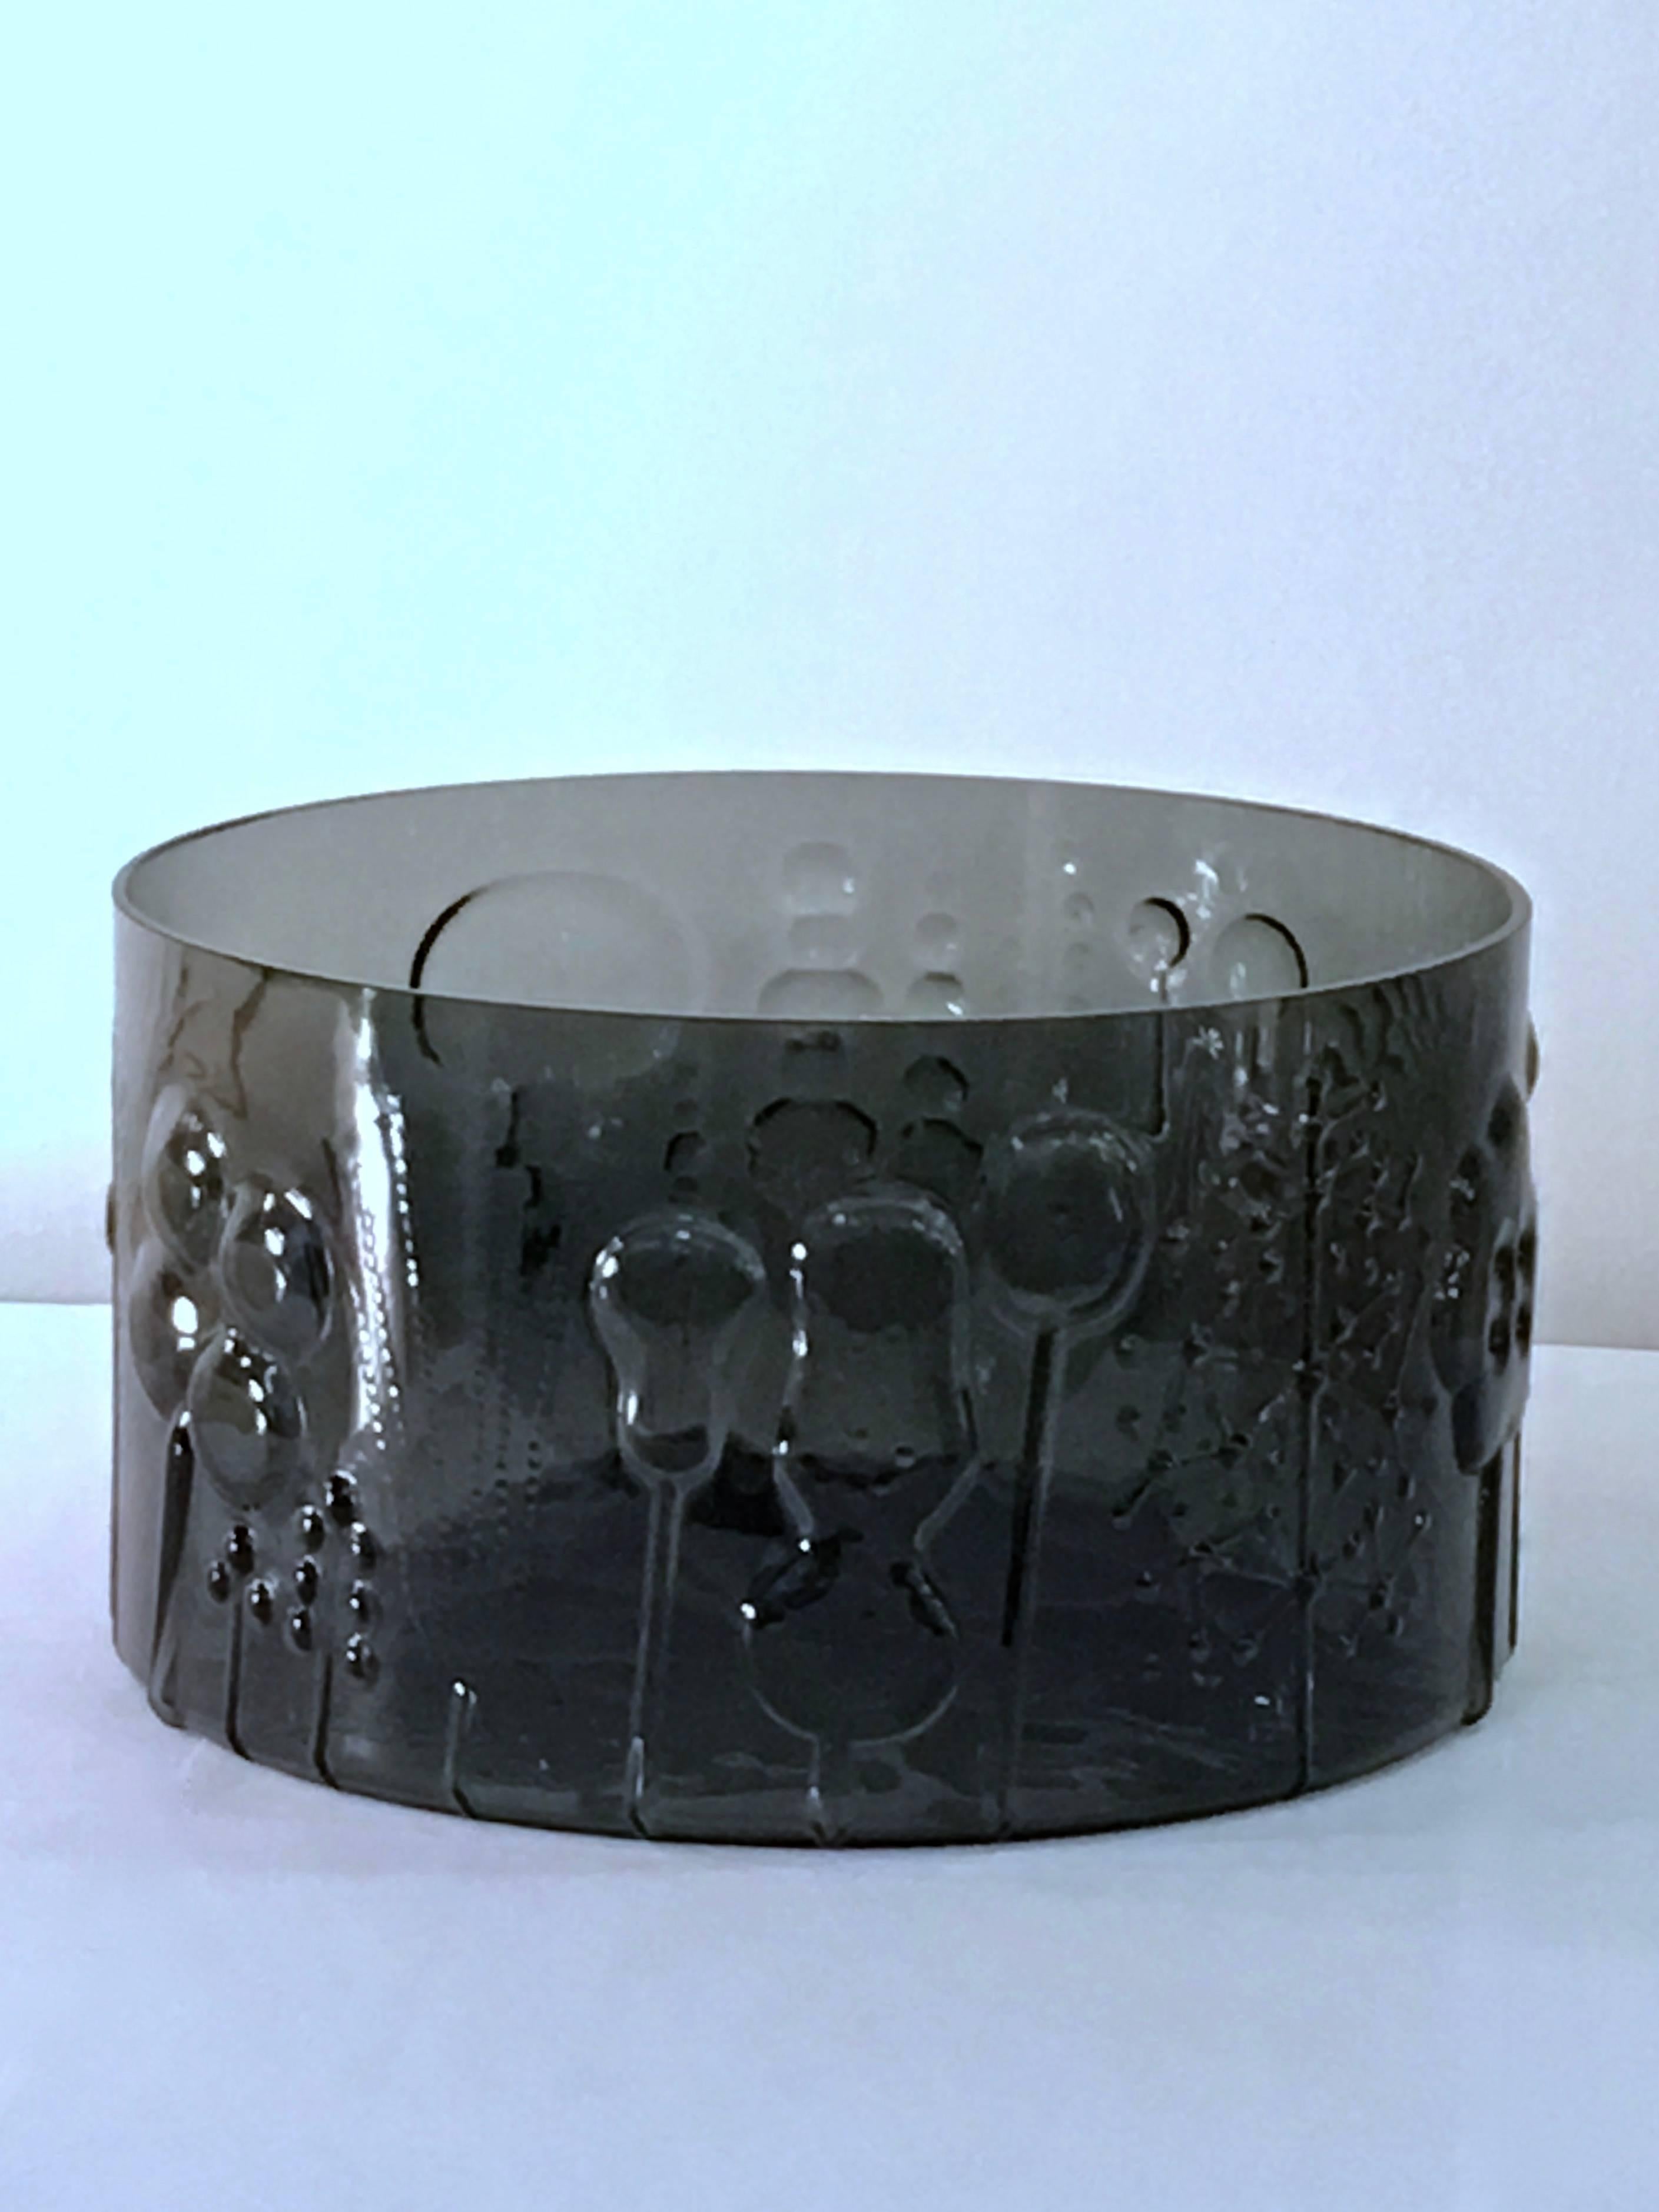 Extraordinary art glass fruit bowl or centerpiece in the Flora series by Oiva Toikka. This piece is in a rare and enchanting dark gray glass, and has a little more weight and depth to the relief than is normally found. More pieces, sizes, colors